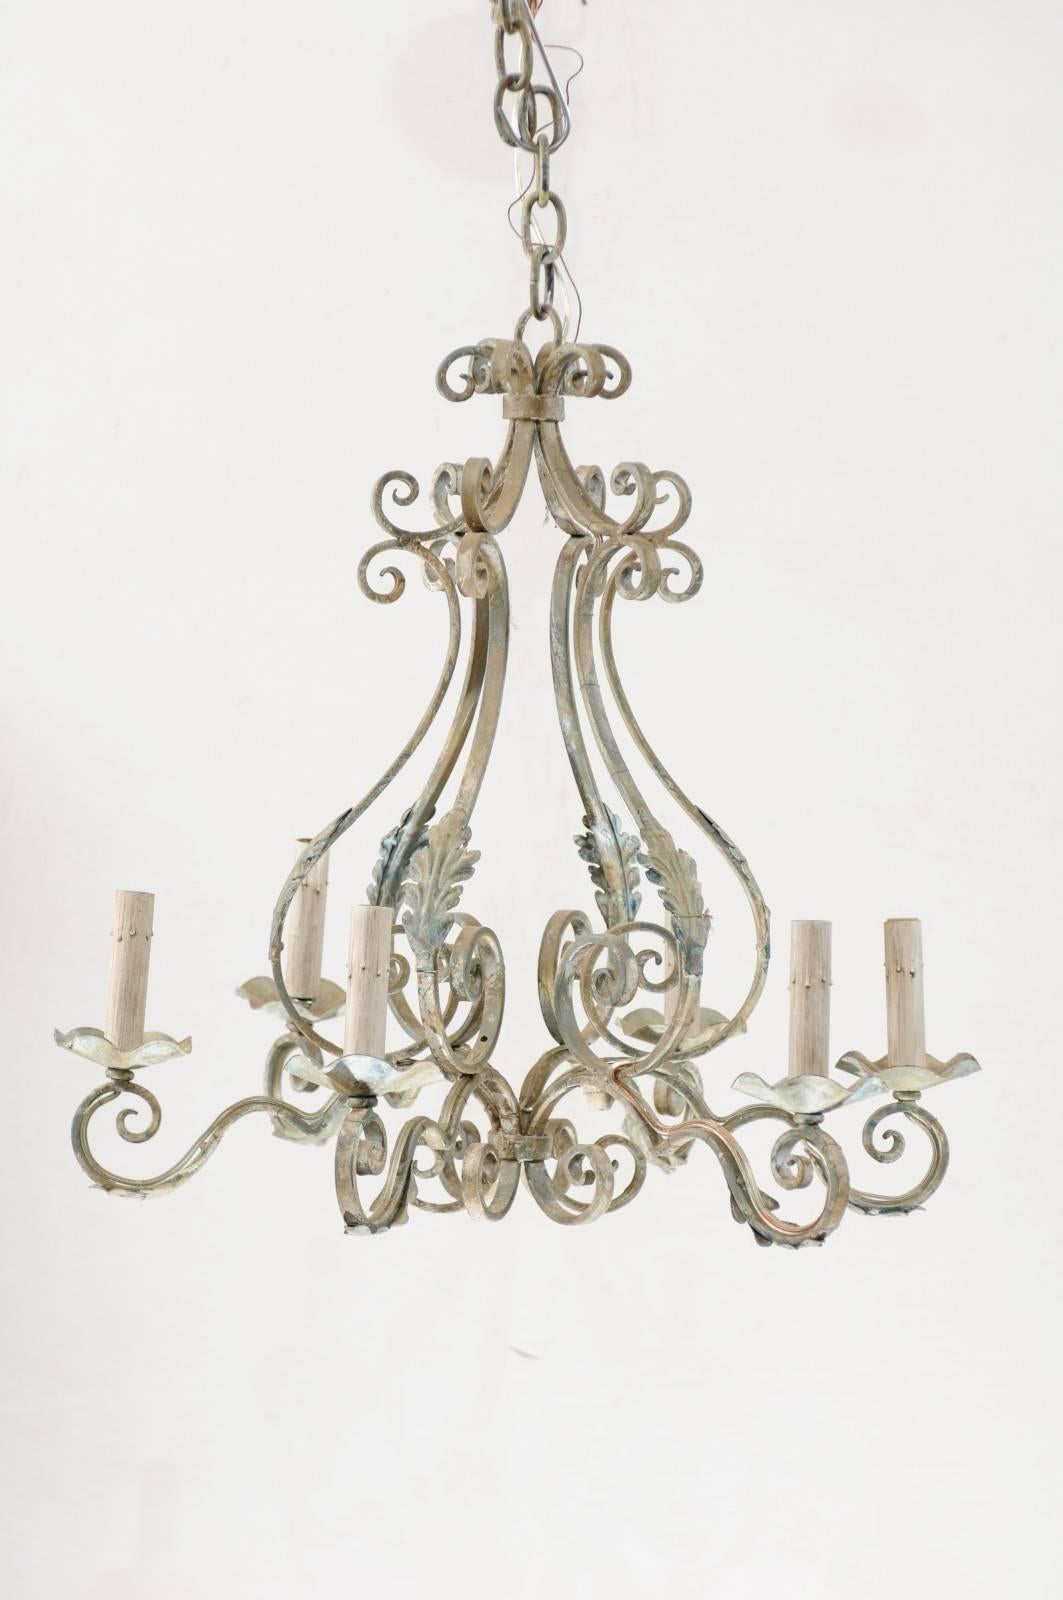 A French six-light pear shaped painted iron chandelier. This French chandelier from the mid-20th century features flowing scroll and acanthus leaf motifs throughout. Six scrolled arms lead out to candle sleeves that house light sockets. This iron